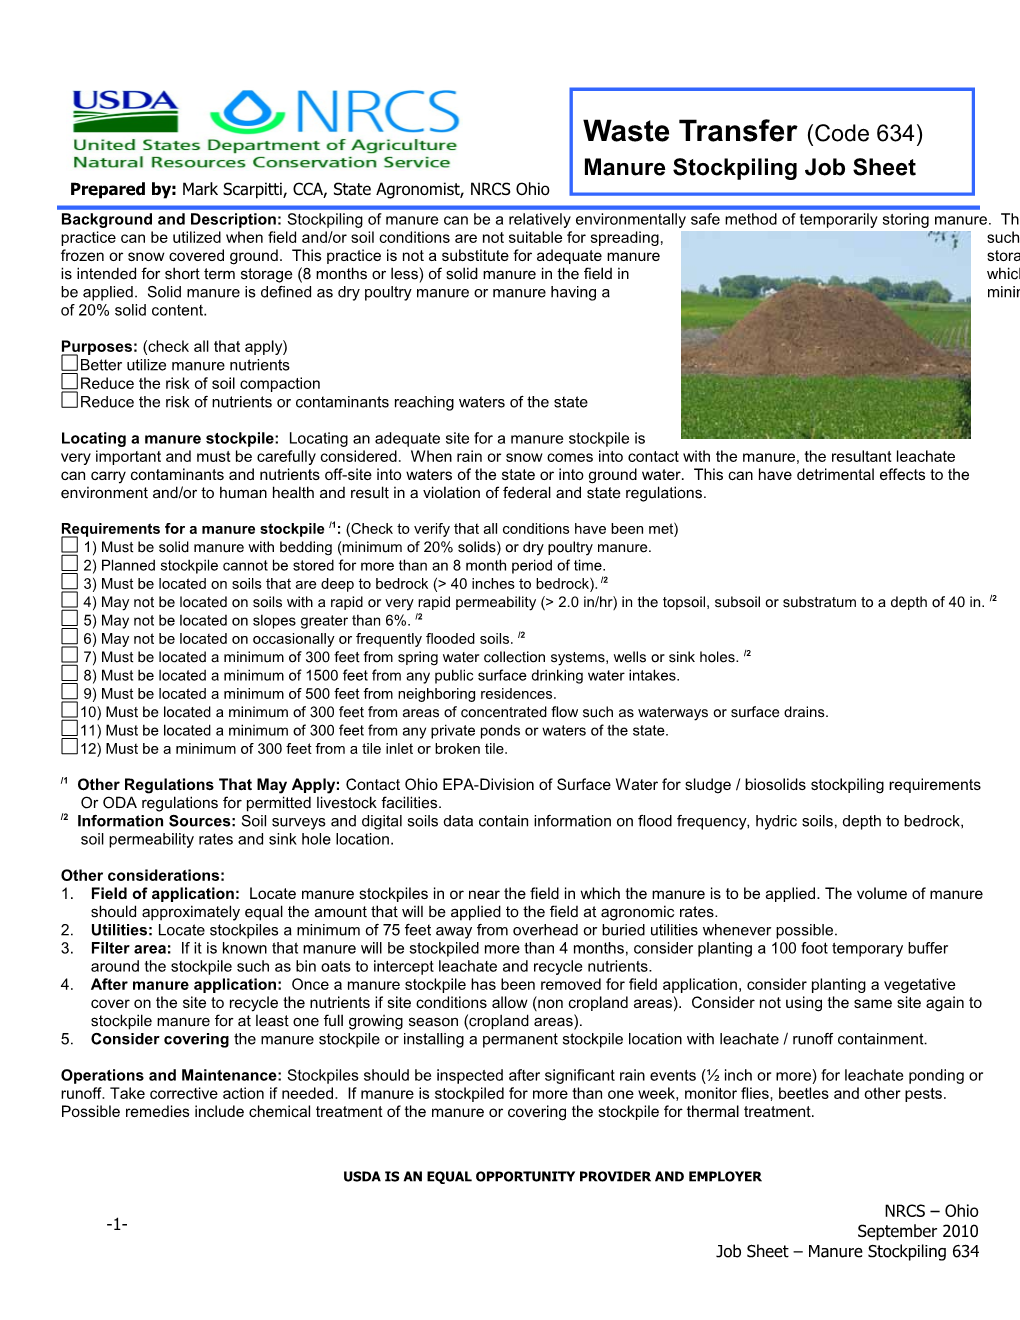 Background And Description – Stockpiling Of Manure Can Be A Relatively Environmentally Safe Method Of Temporarily Storing Manure